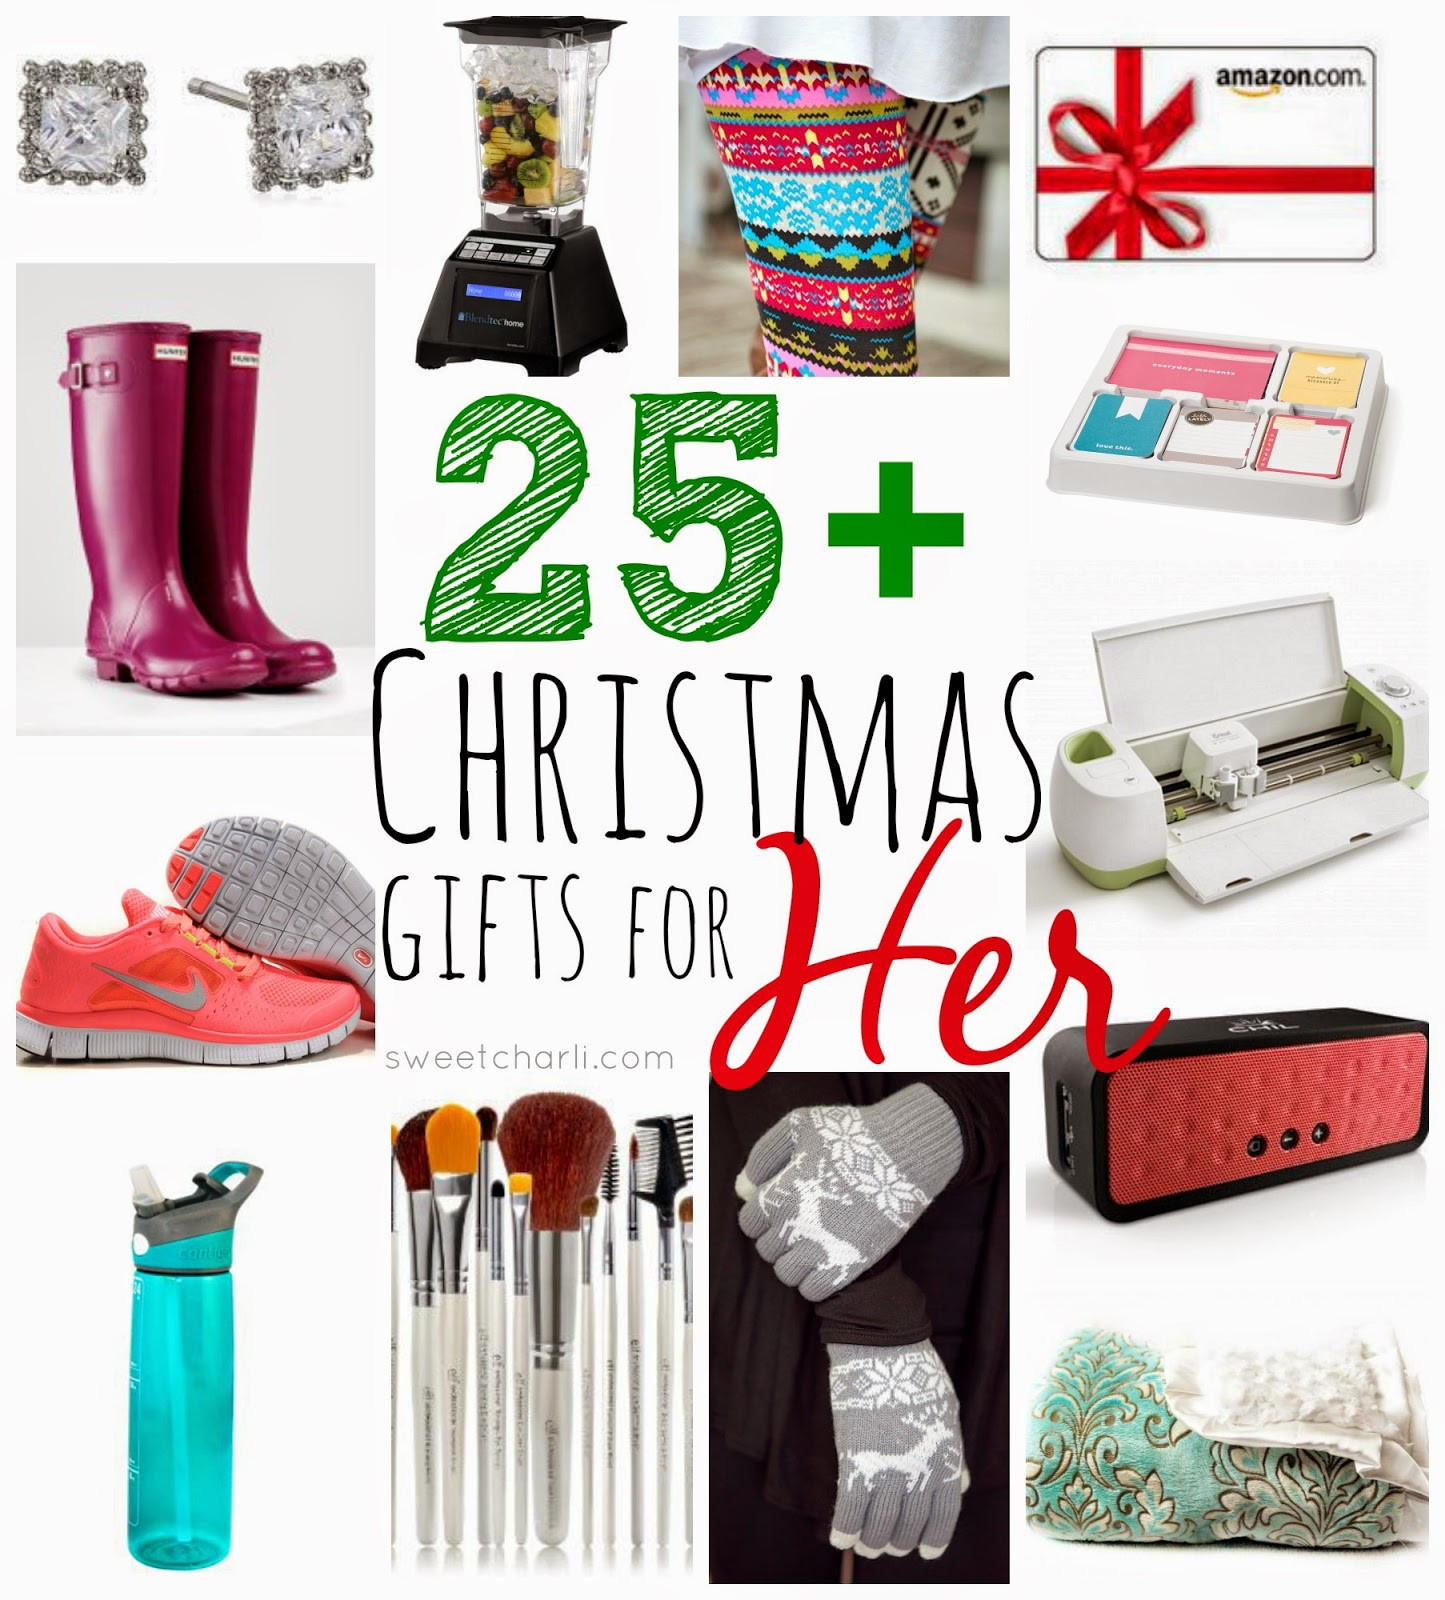 Holiday Gift Ideas For Her
 25 Christmas Gifts for Her Sweet Charli